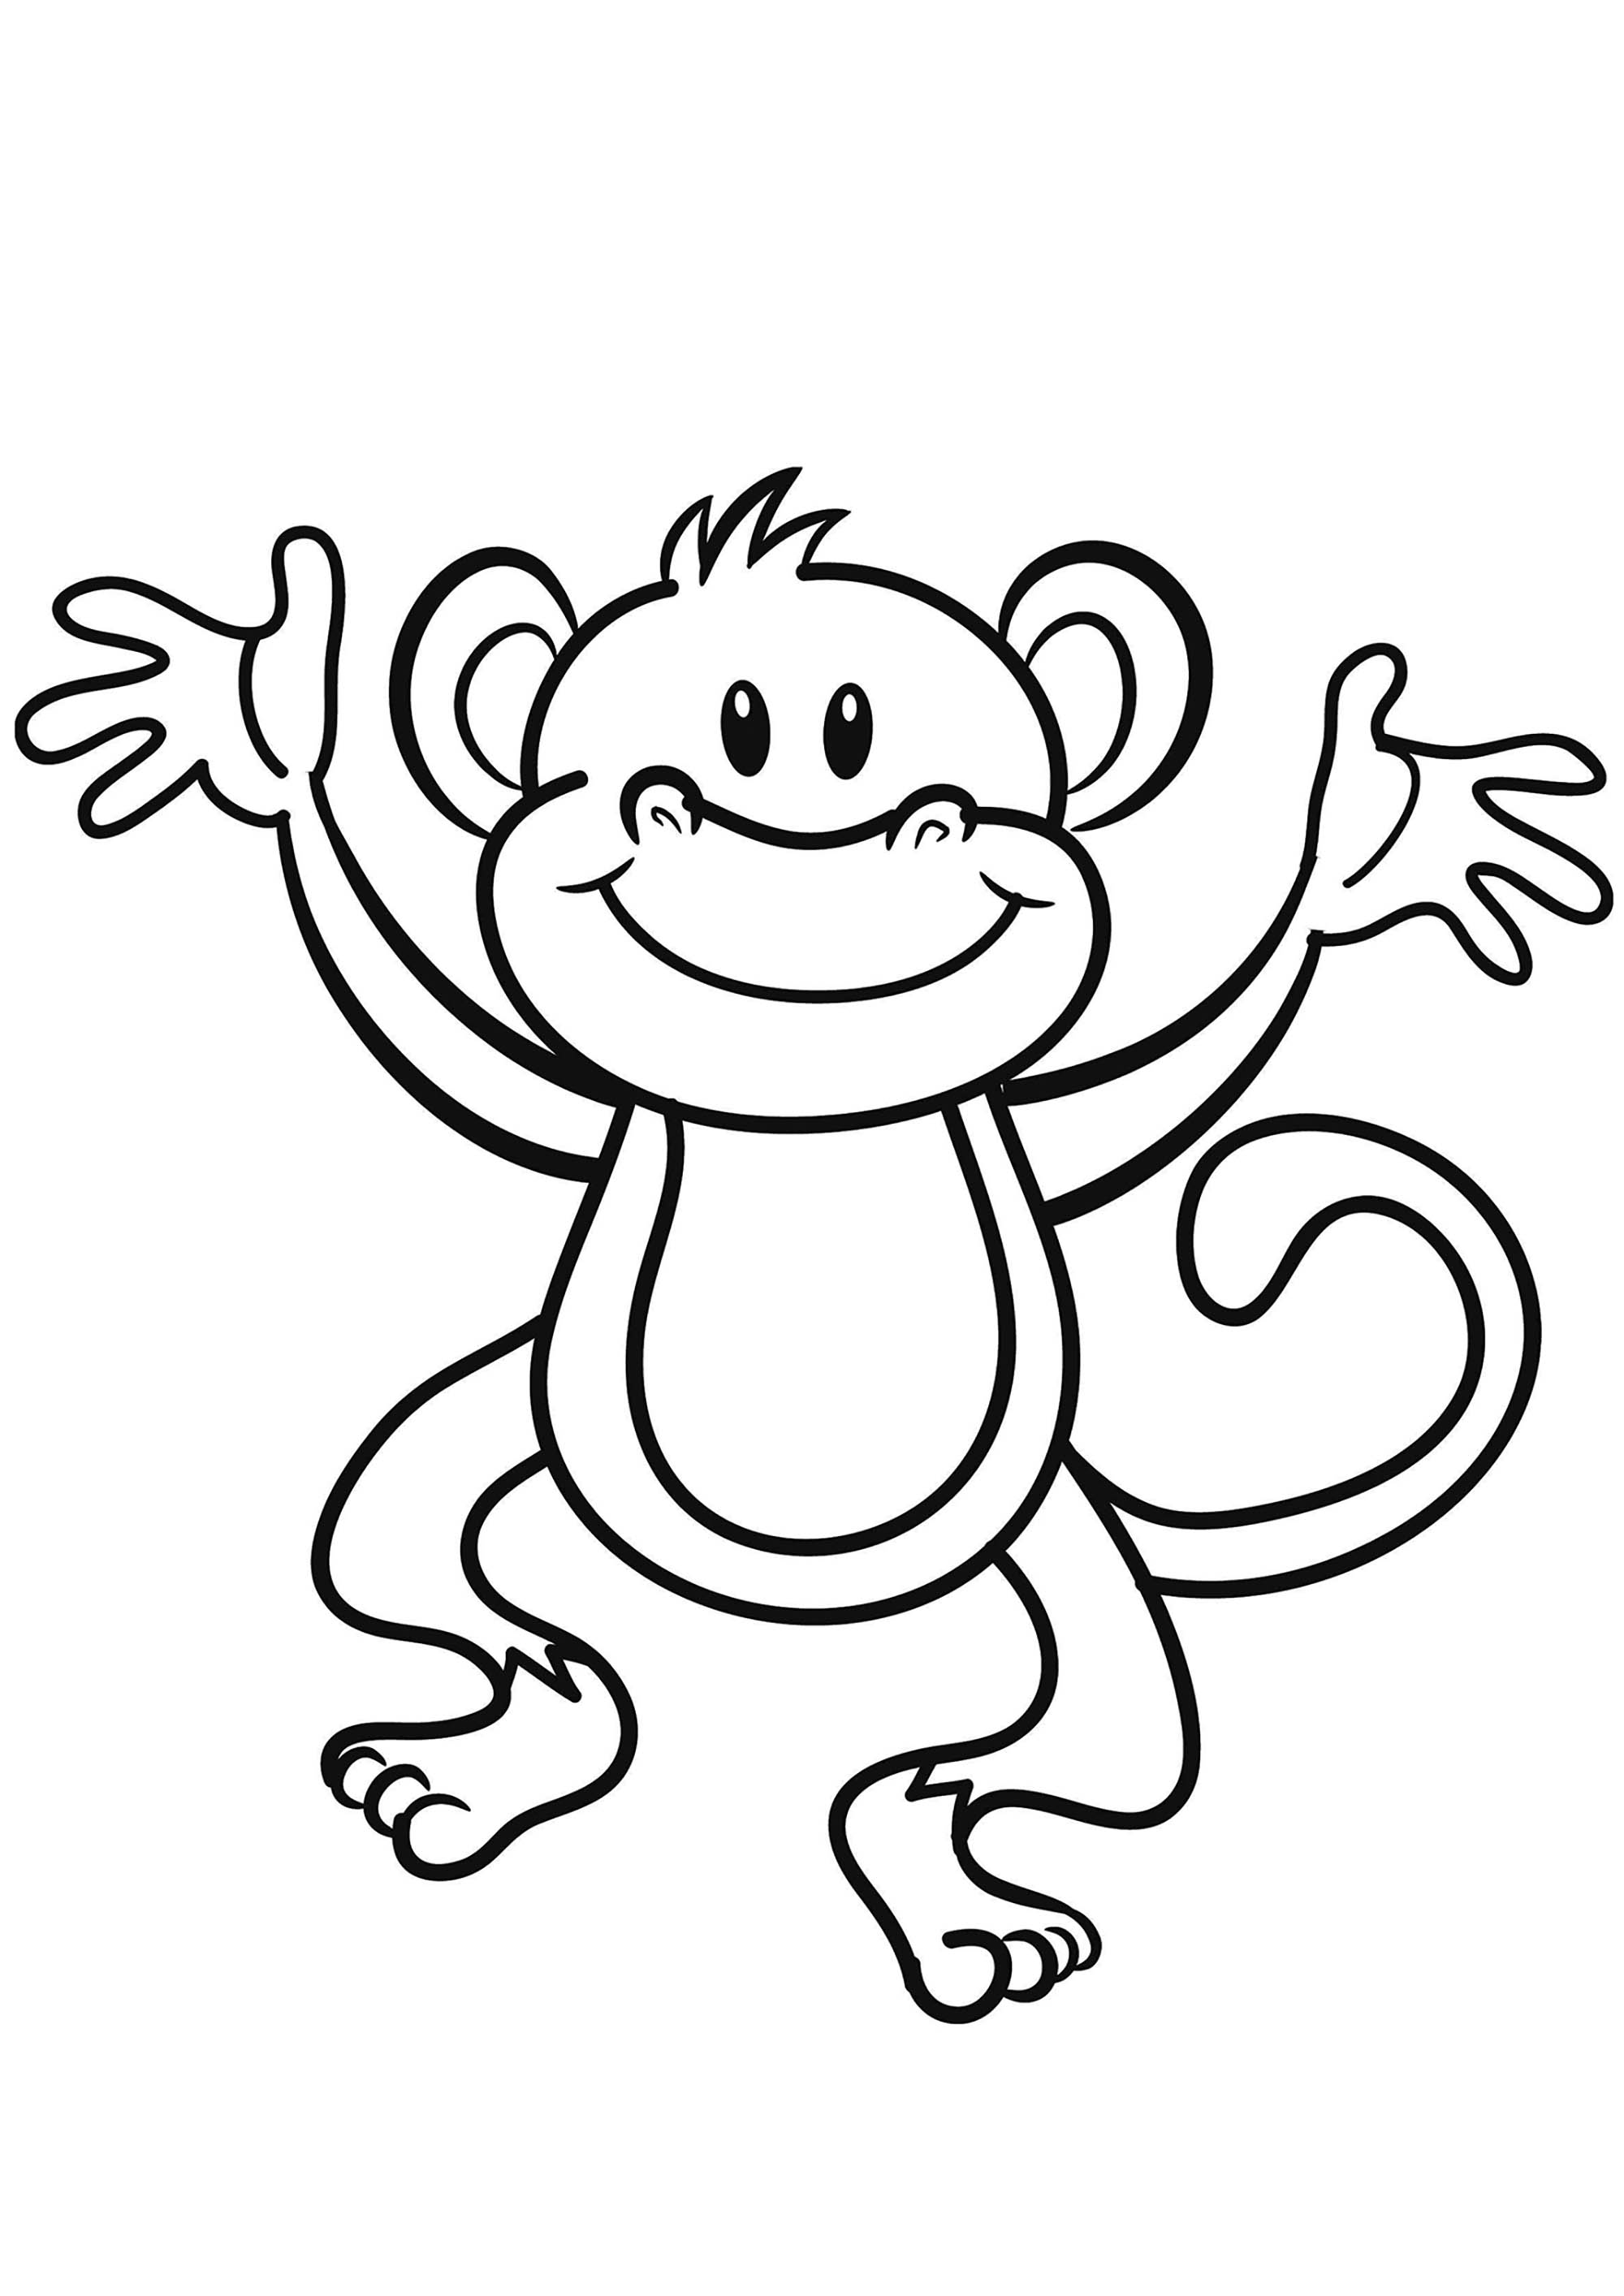 Monkeys to download   Monkeys Kids Coloring Pages